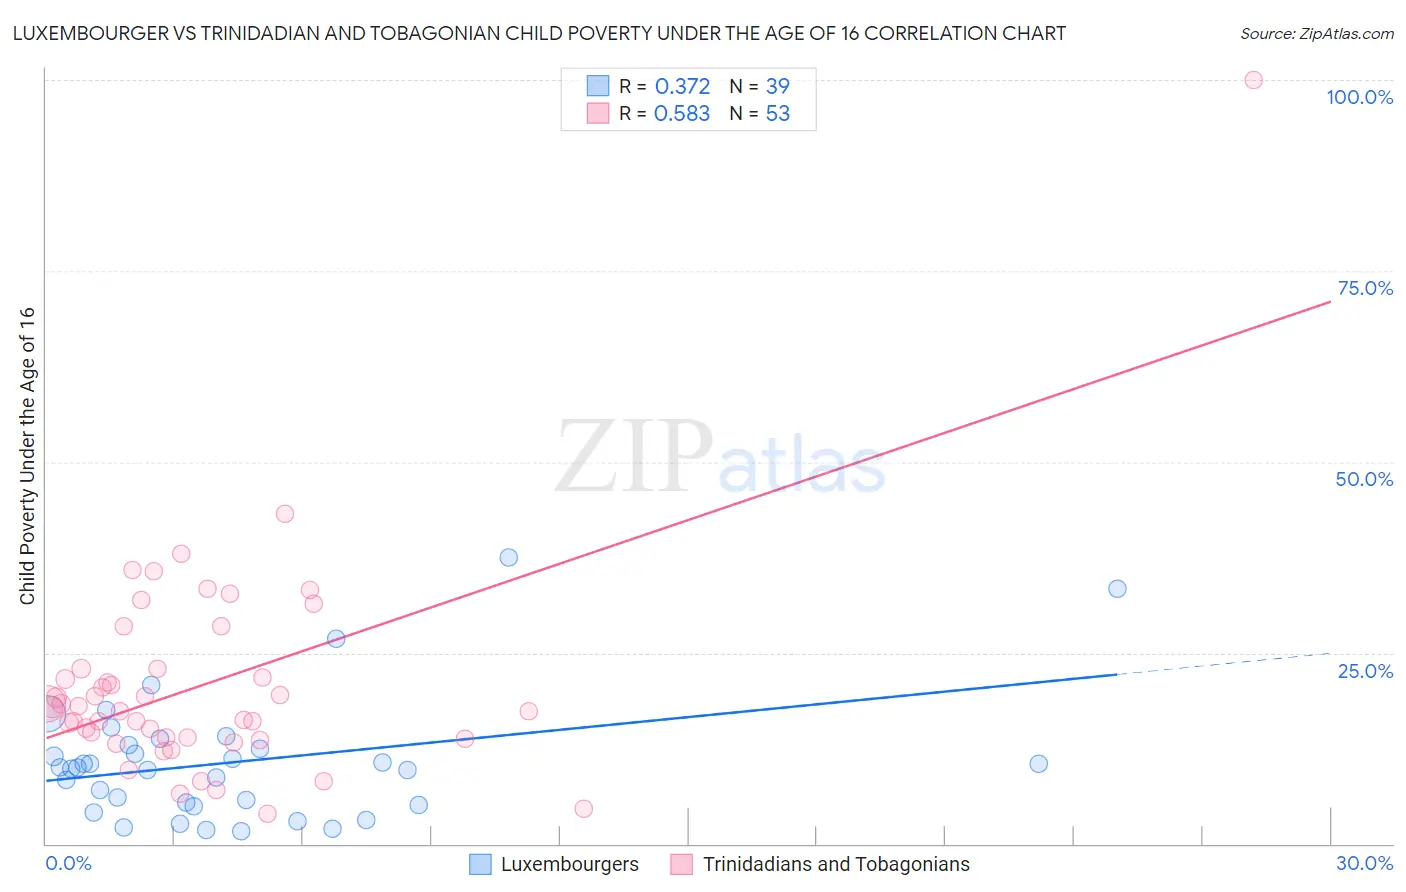 Luxembourger vs Trinidadian and Tobagonian Child Poverty Under the Age of 16